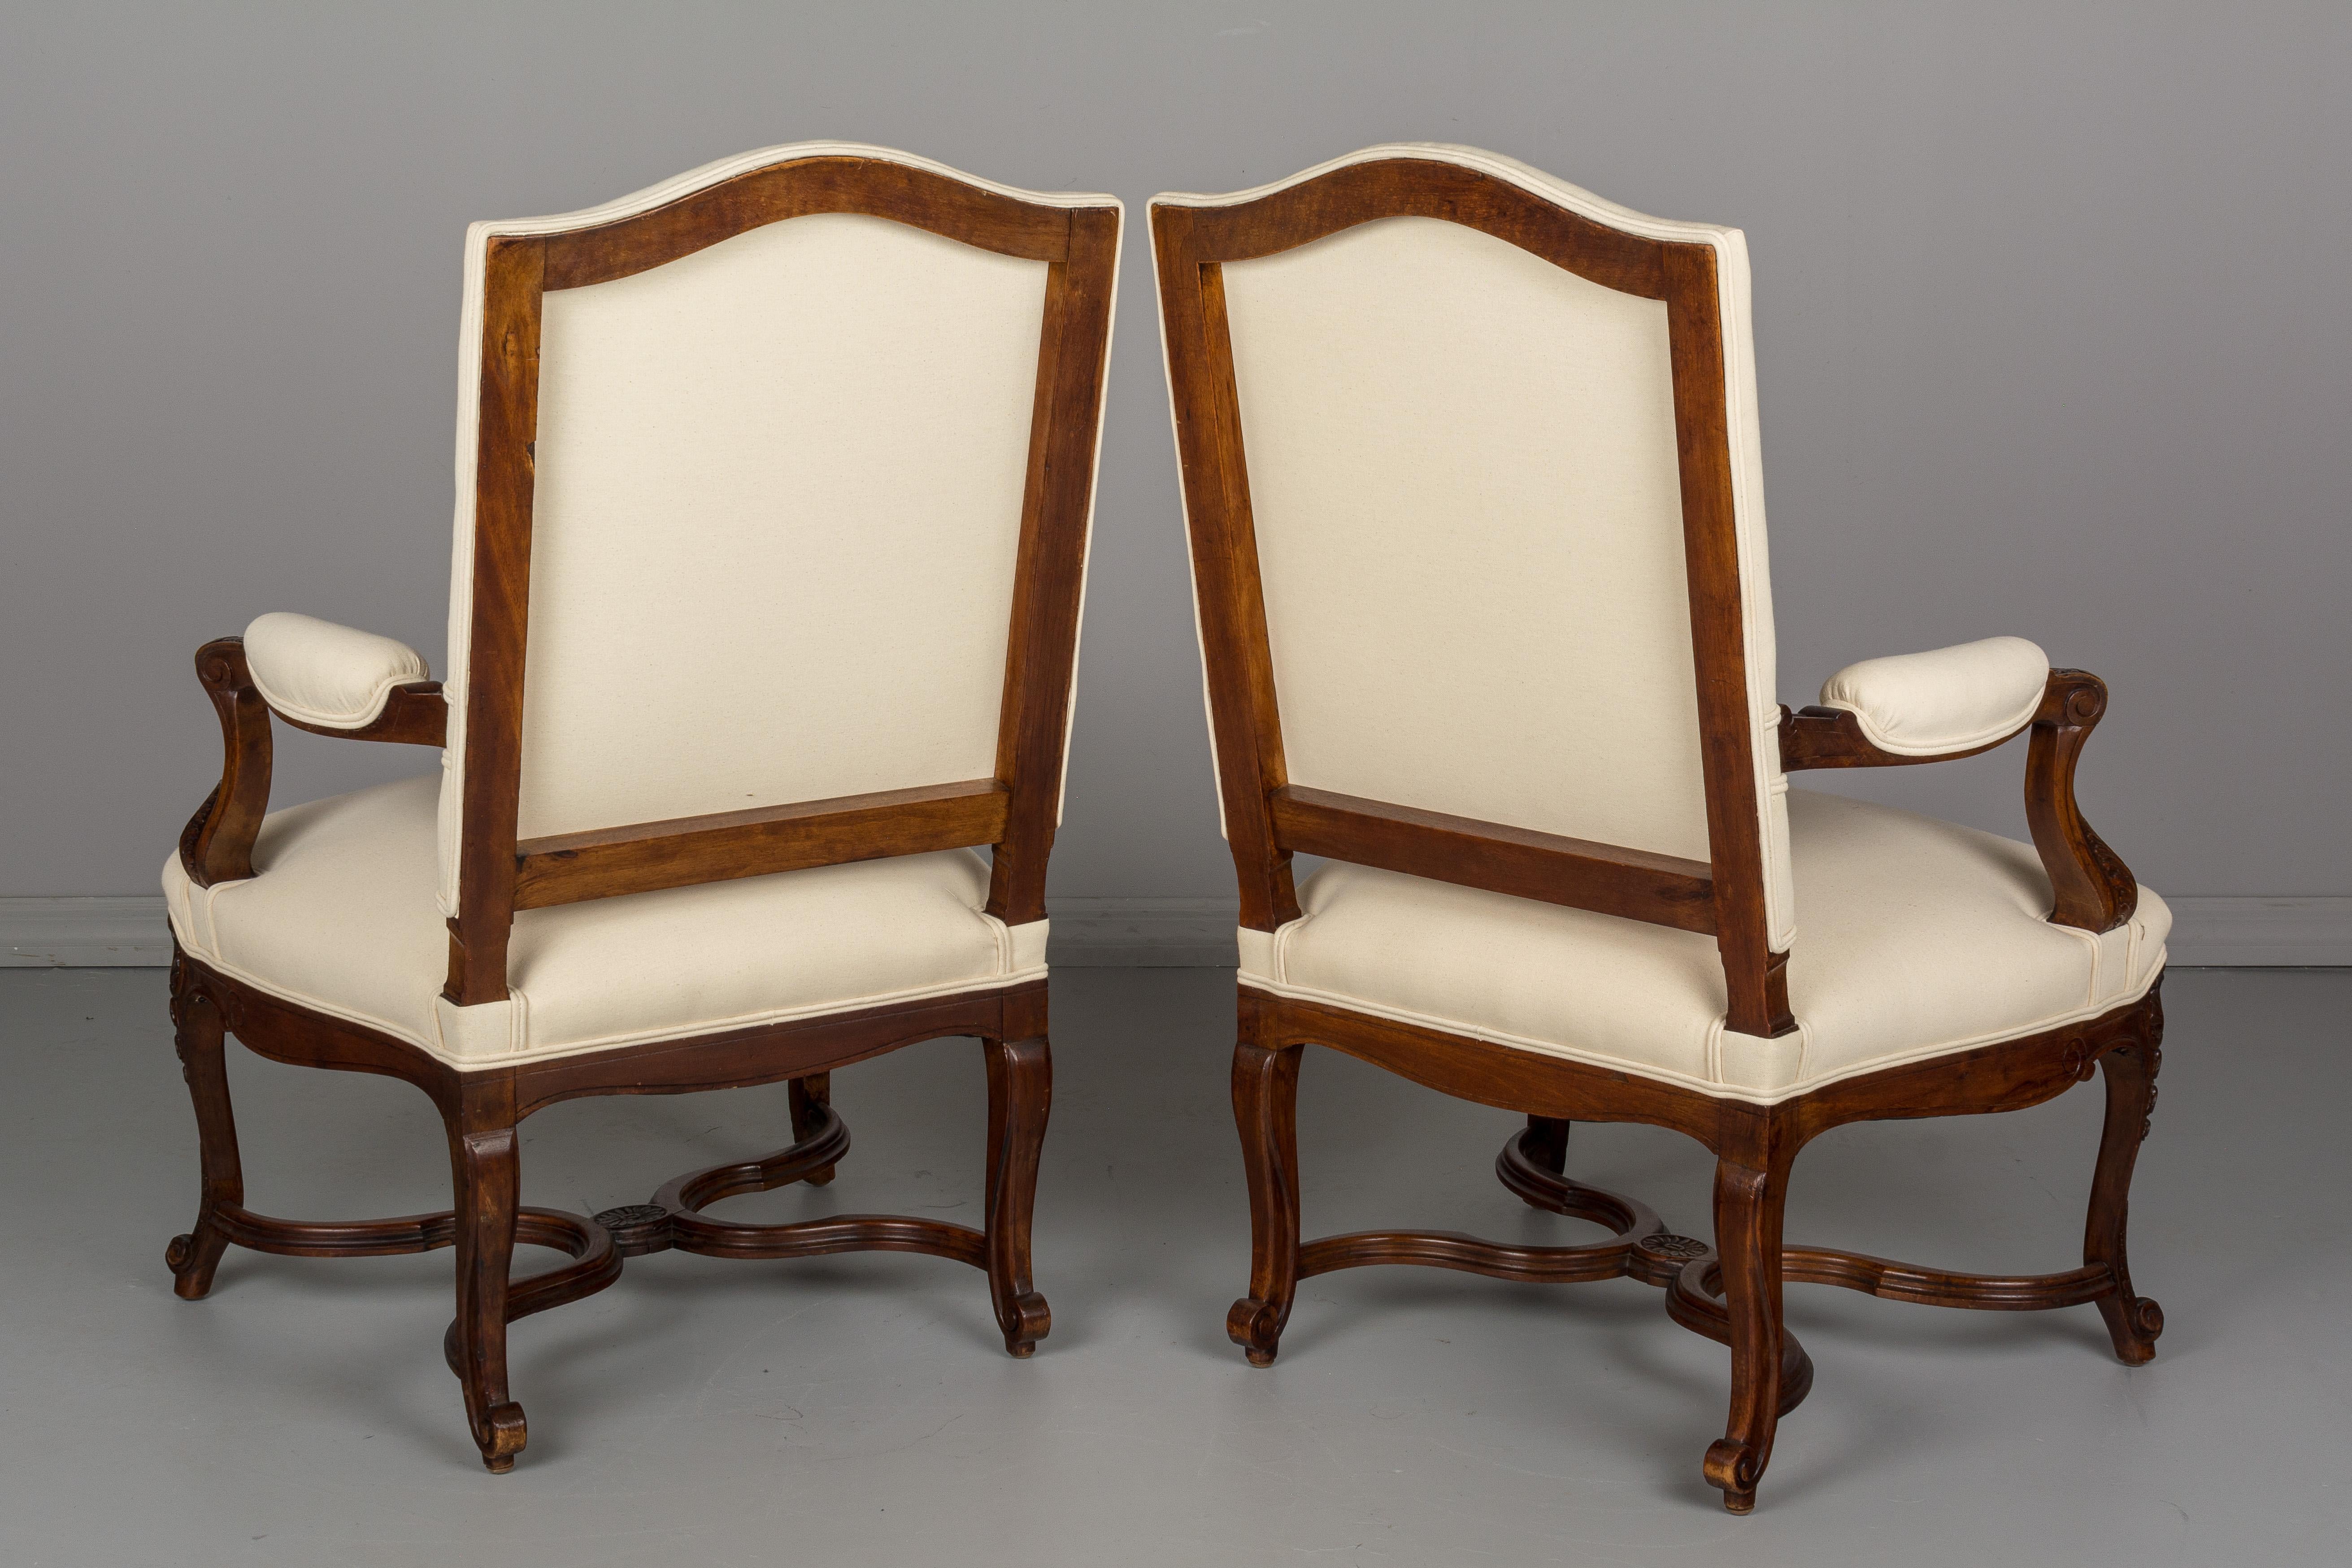 Pair of French Regency Style Fauteuils or Armchairs 1